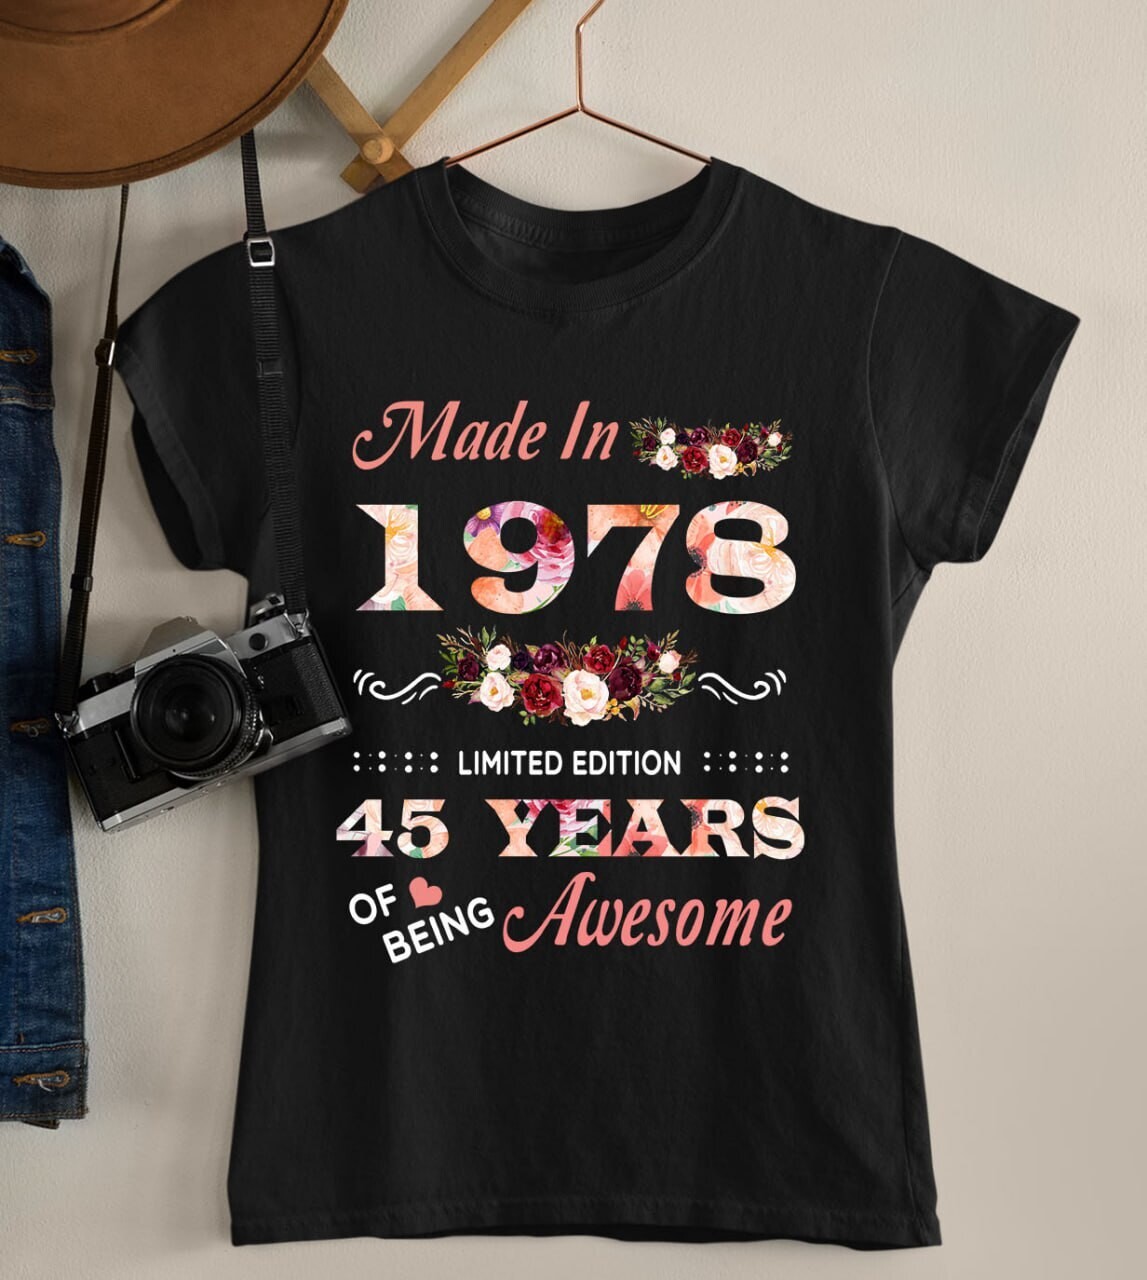 Made In1983 Limited Edition 40 Years Of Being Awesome Birthday T-Shirt